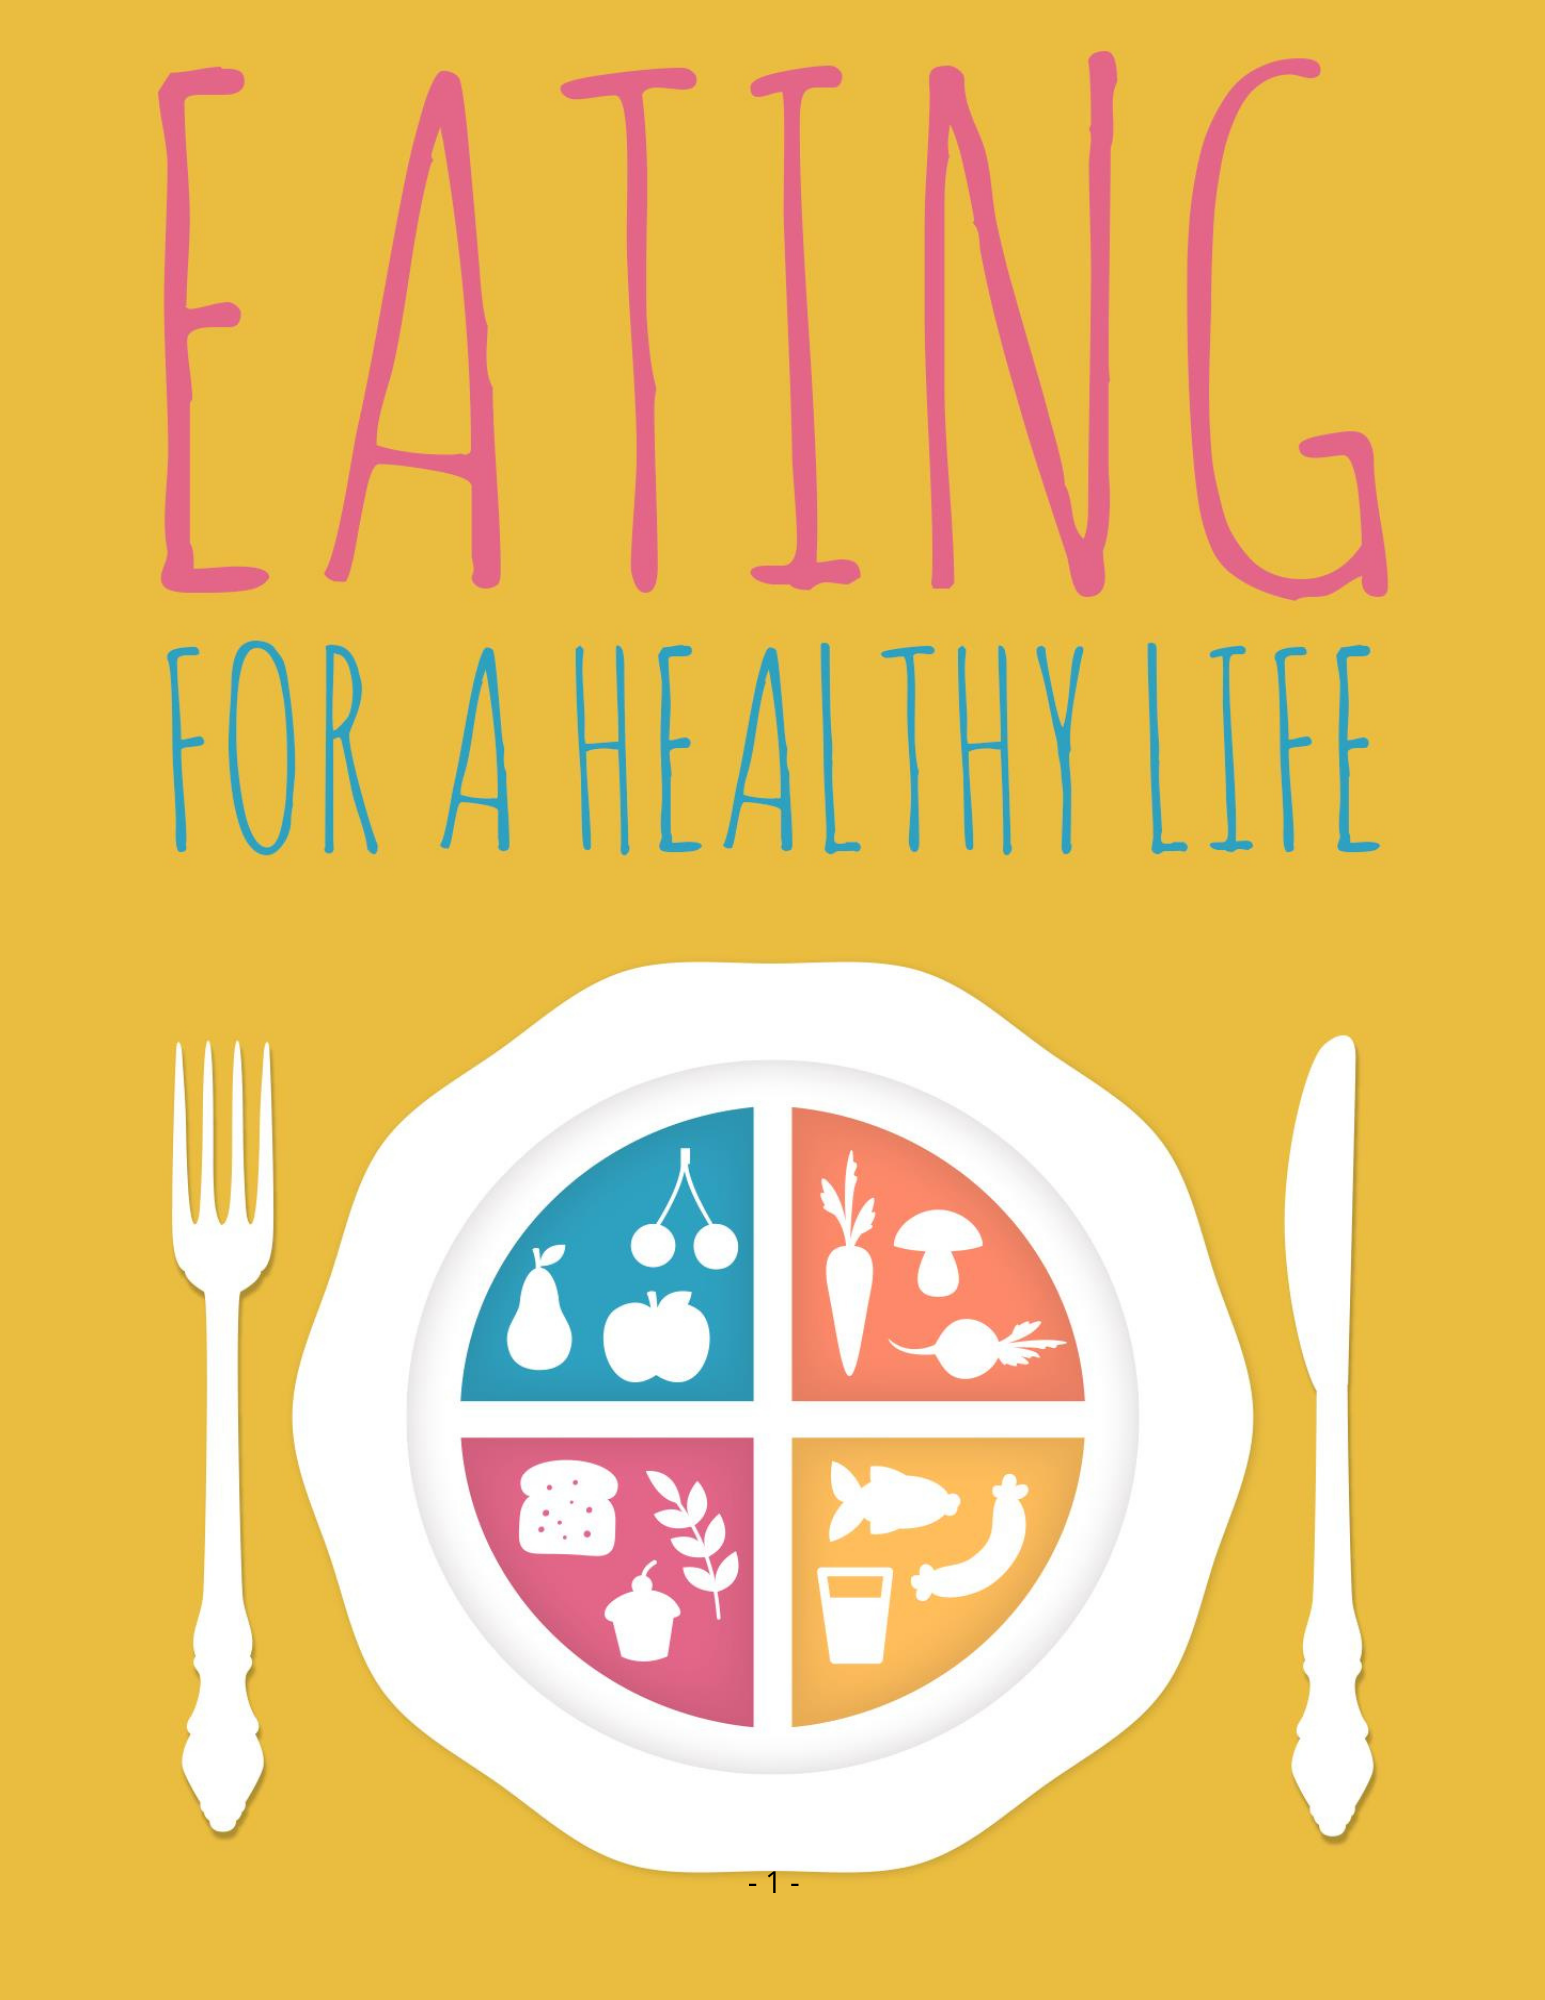 Eating for a Healthy Life PDF ebook - Download Delight